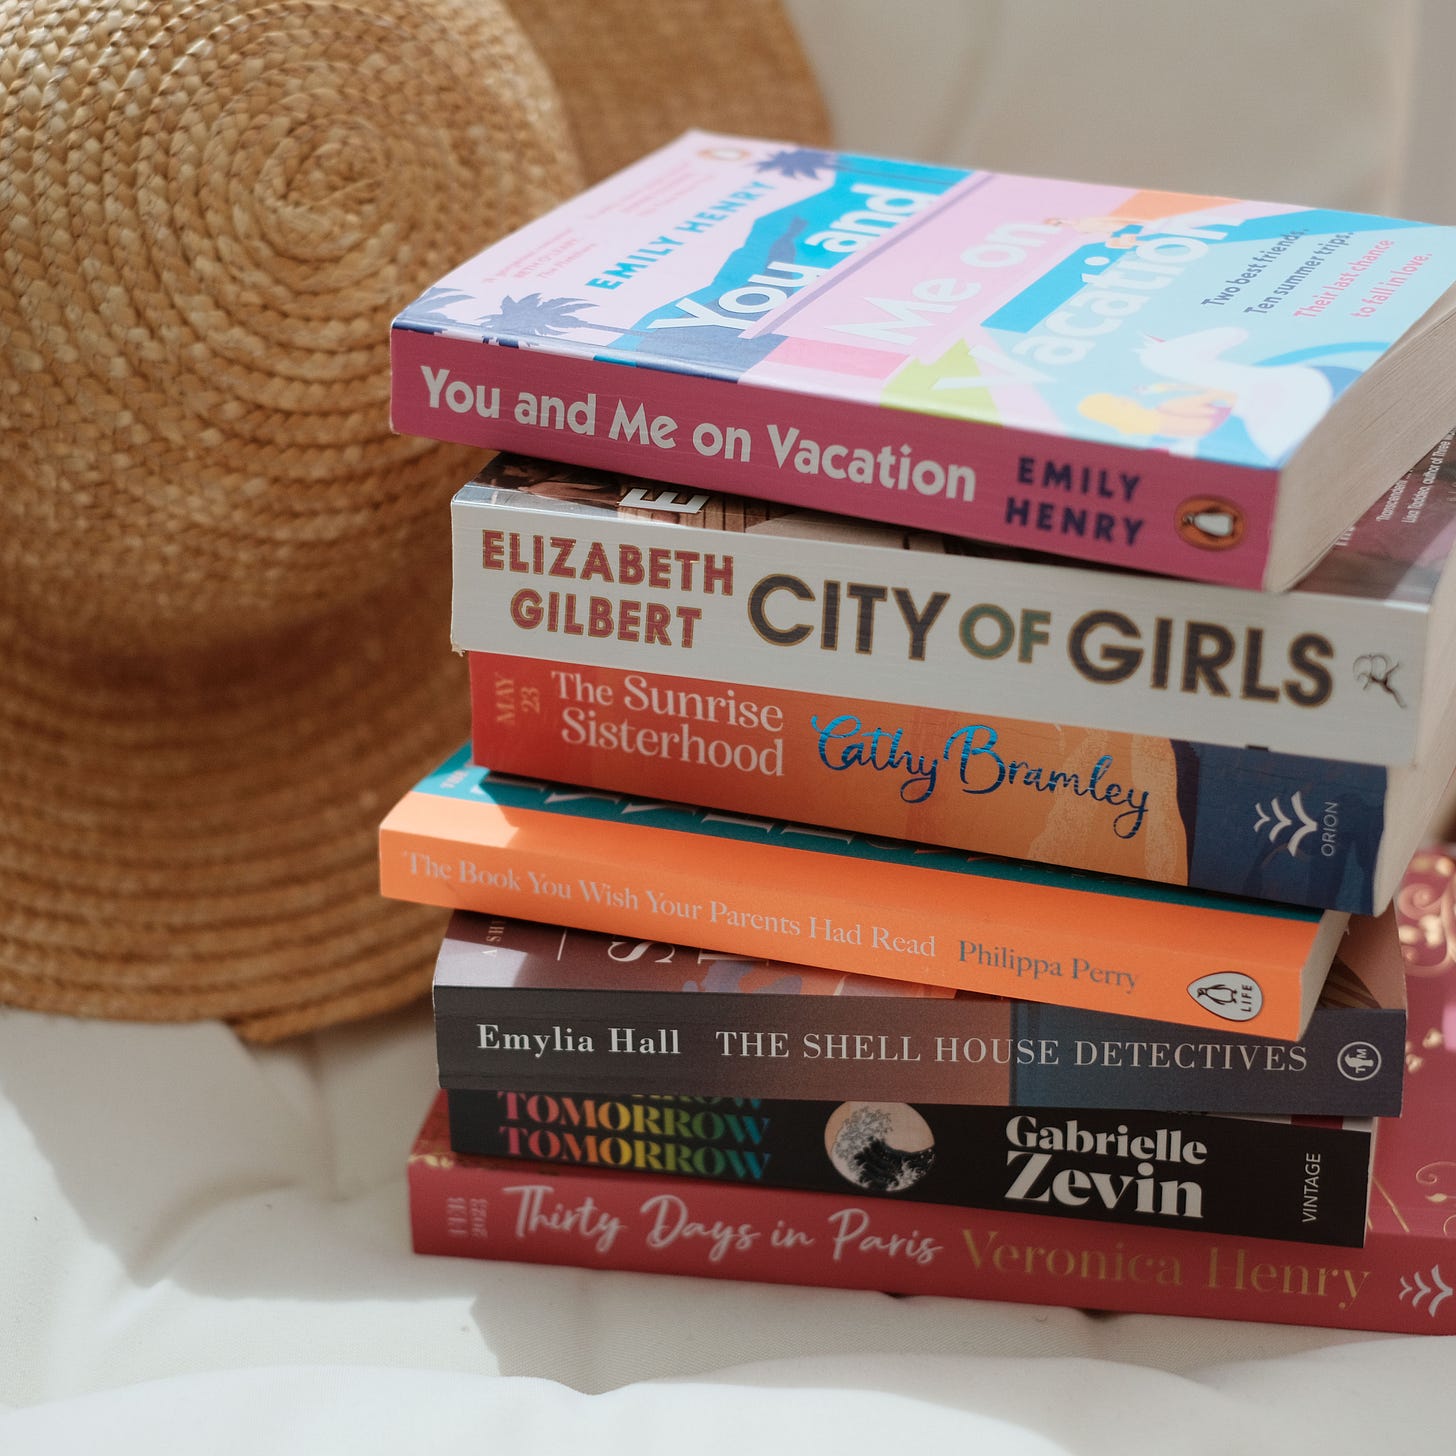 A stack of books on a white cushion. There is a straw hat in the background. The books are You and Me on Vacation by Emily Henry, City of Girls by Elizabeth Gilbert, The Sunrise Sisterhood by Cathy Bramley, The Book You Wish Your Parents Had Read by Philippa Perry, The Shell House Detectives by Emylia Hall, Tomorrow, Tomorrow, Tomorrow by Gabrielle Zevin and Thirty Days in Paris by Veronica Henry.